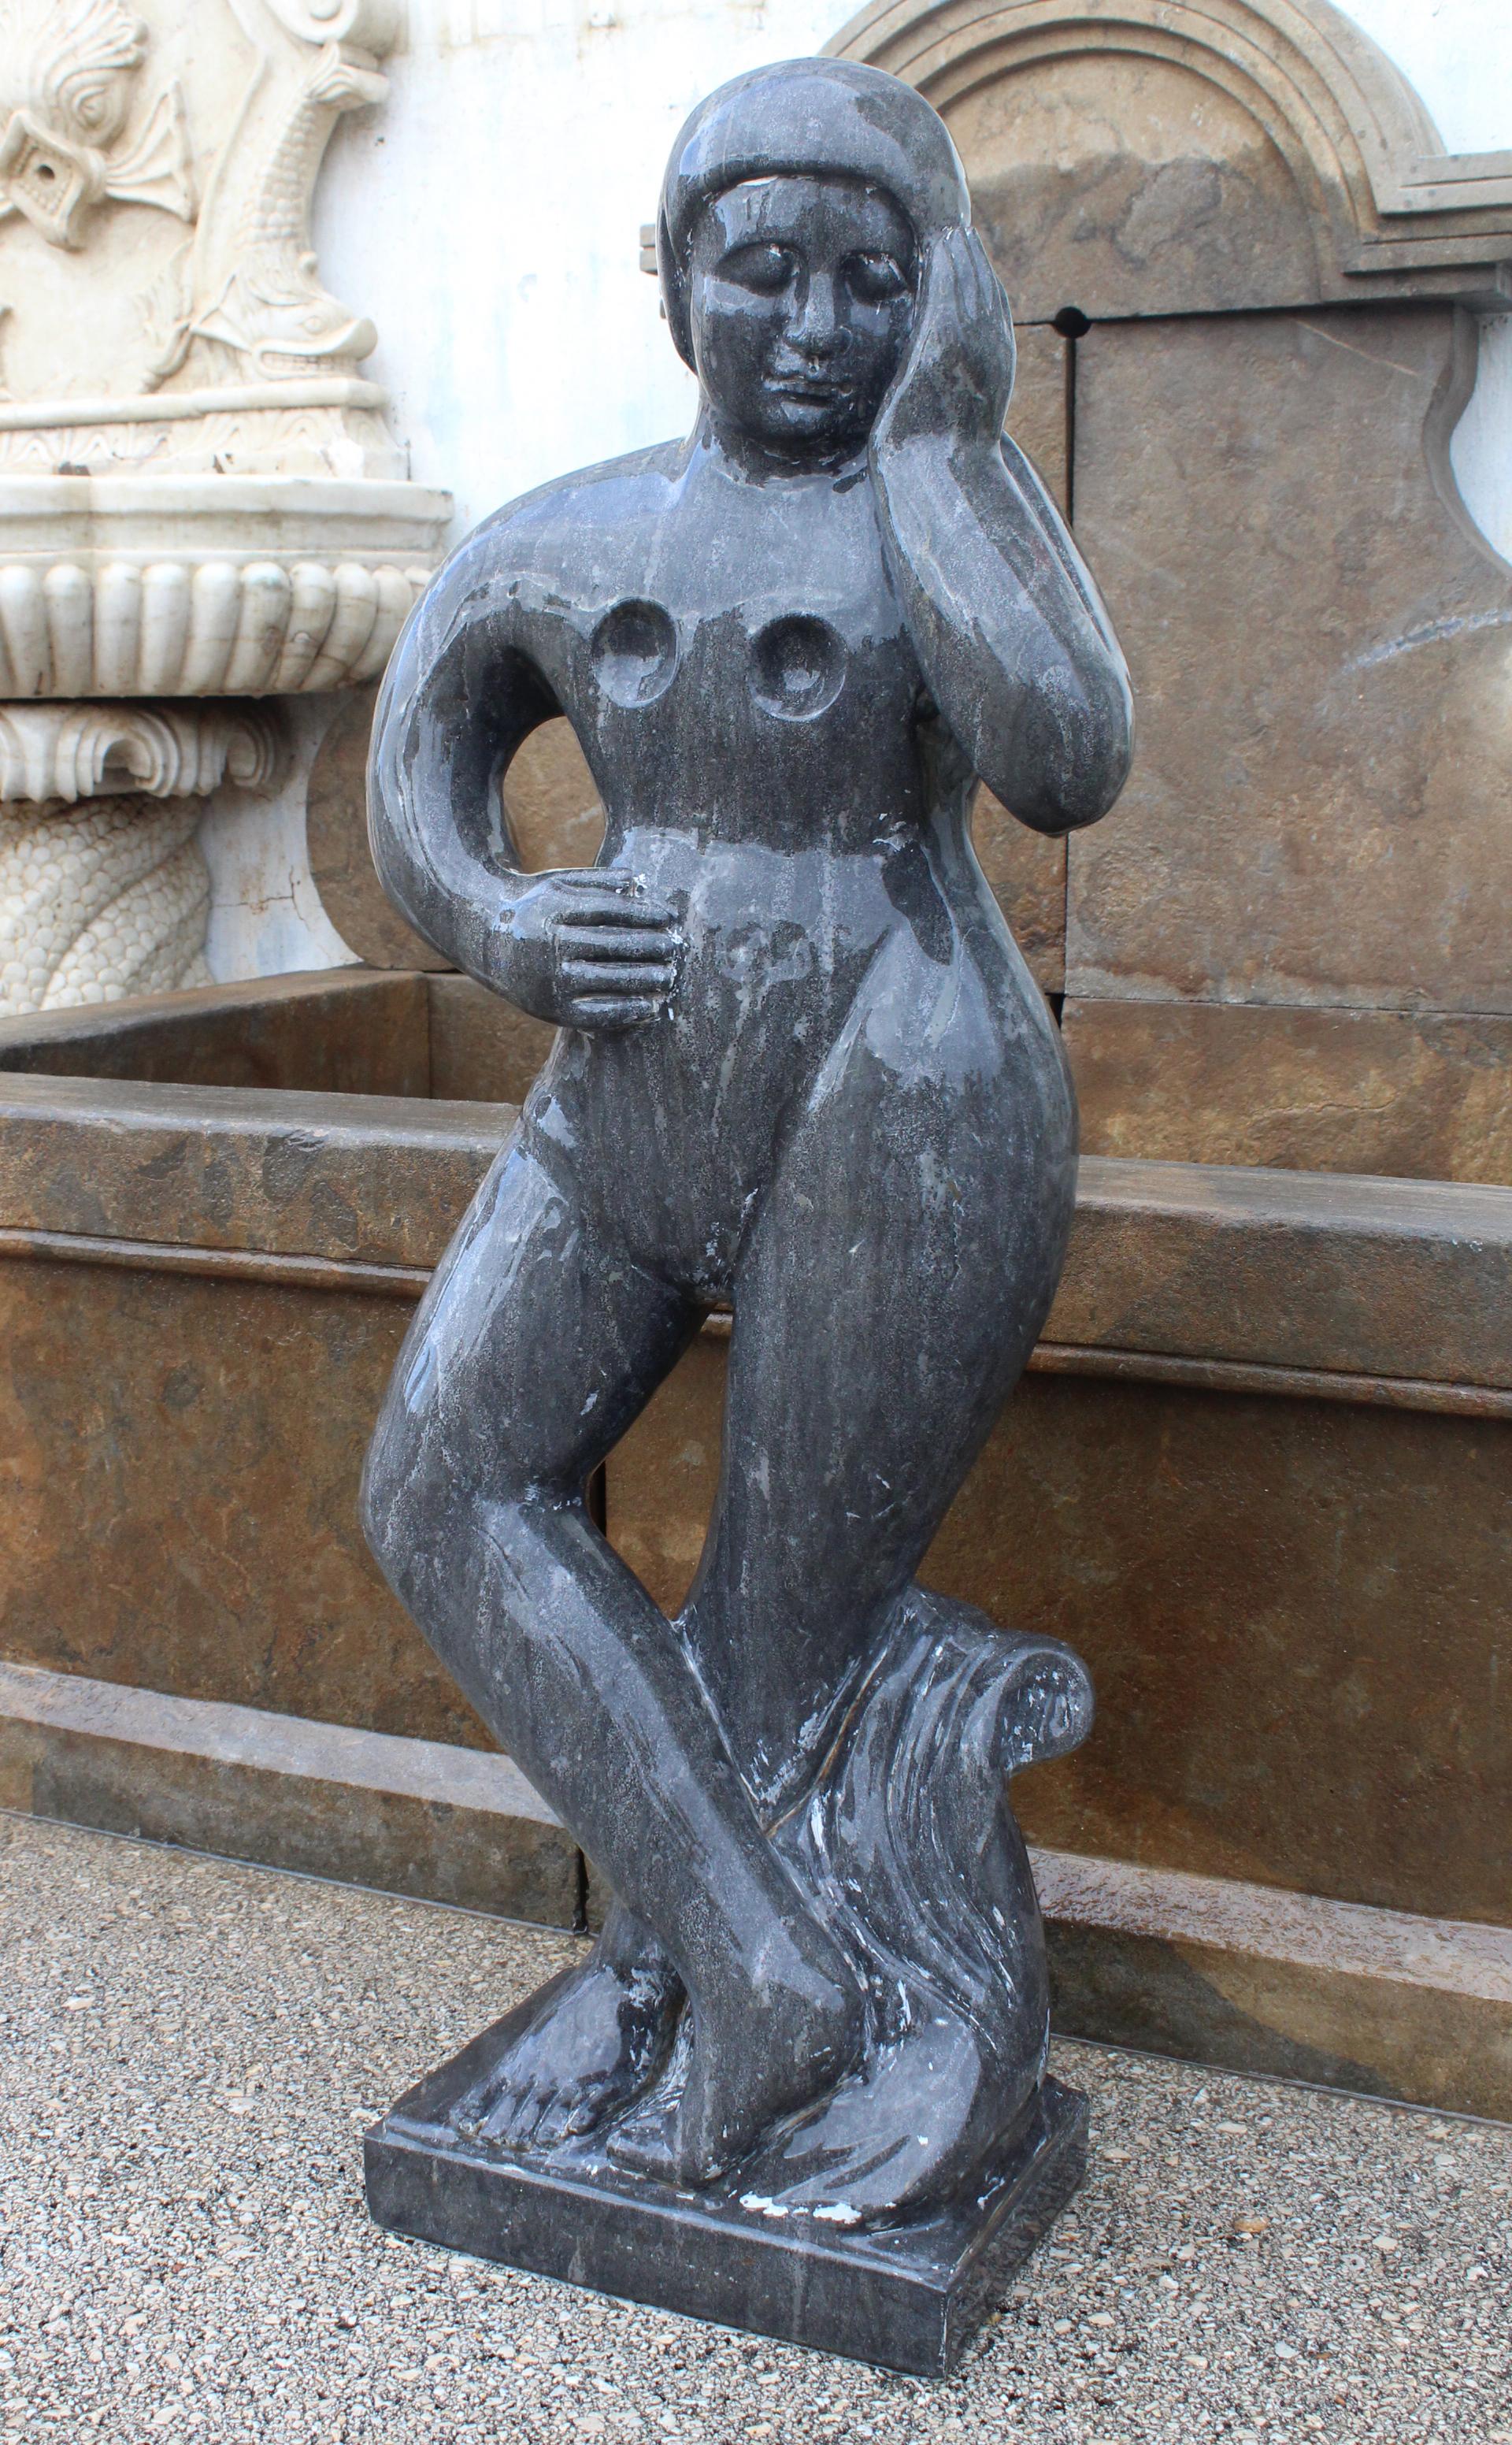 1990s polished modern figurative woman sculpture hand carved in pure Belgian black marble.

